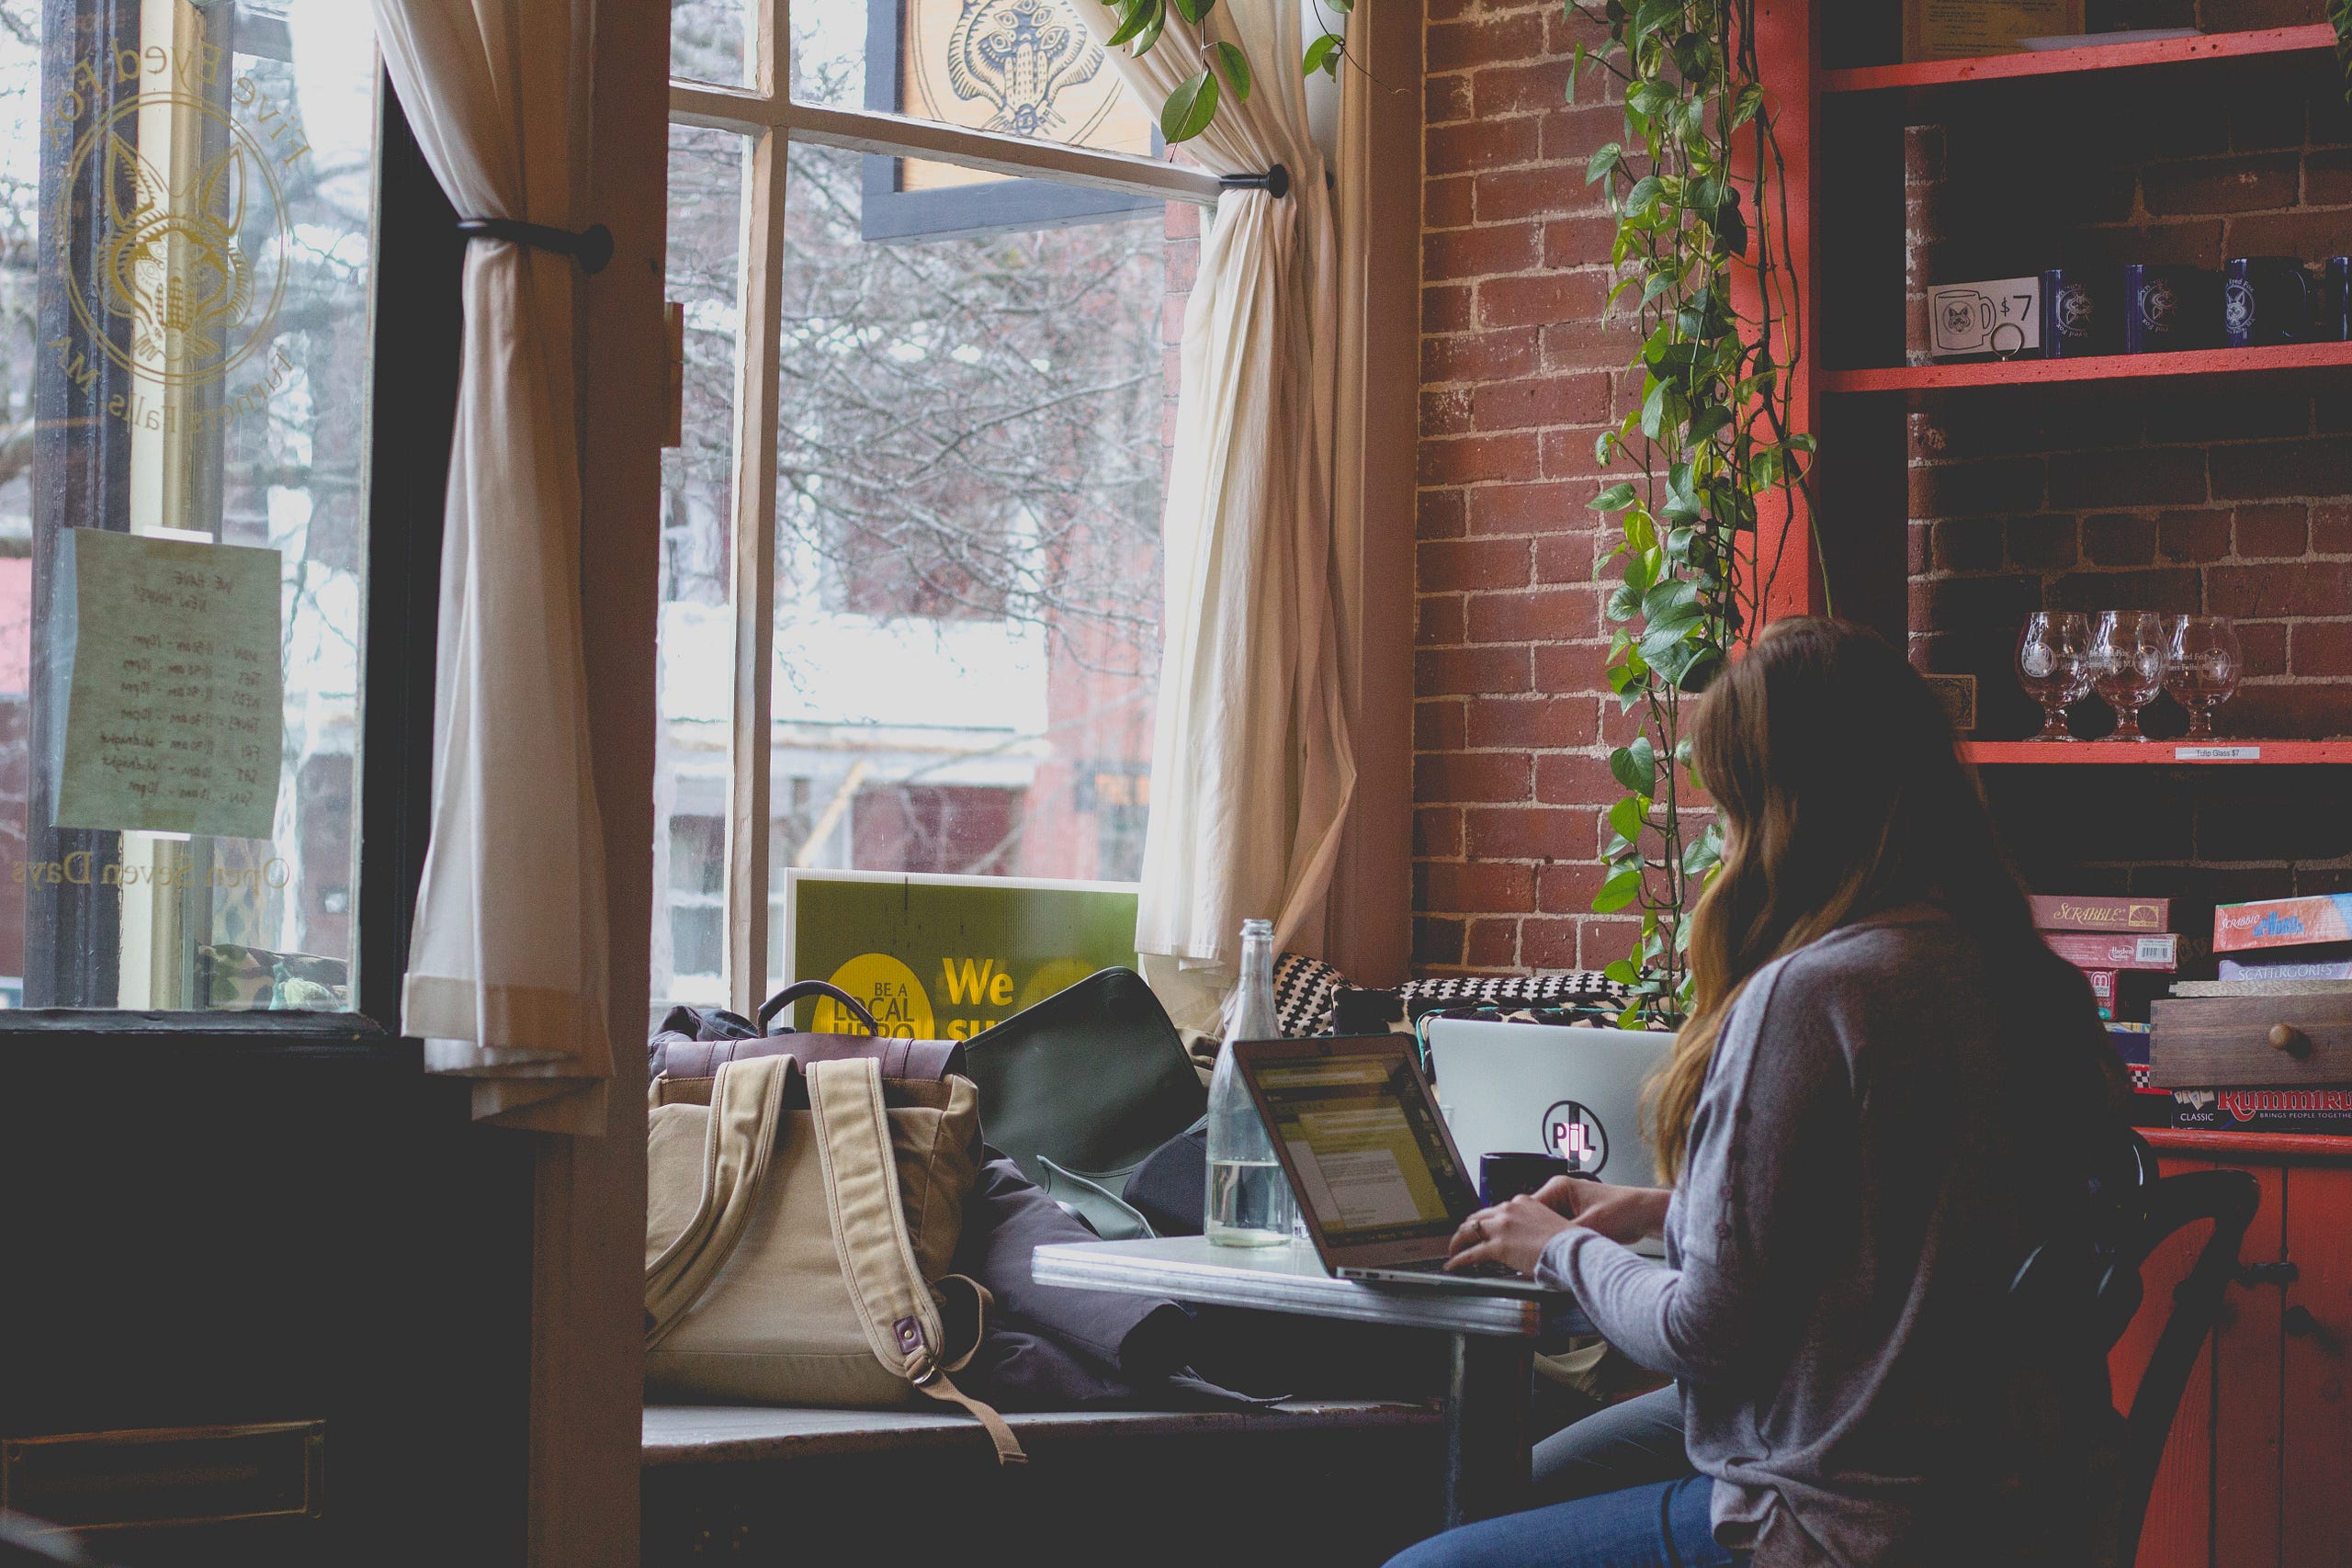 I was working on an online mastery dashboard and testing platform for students who are preparing for college entrance exam | Photo by Bonnie Kittle on Unsplash